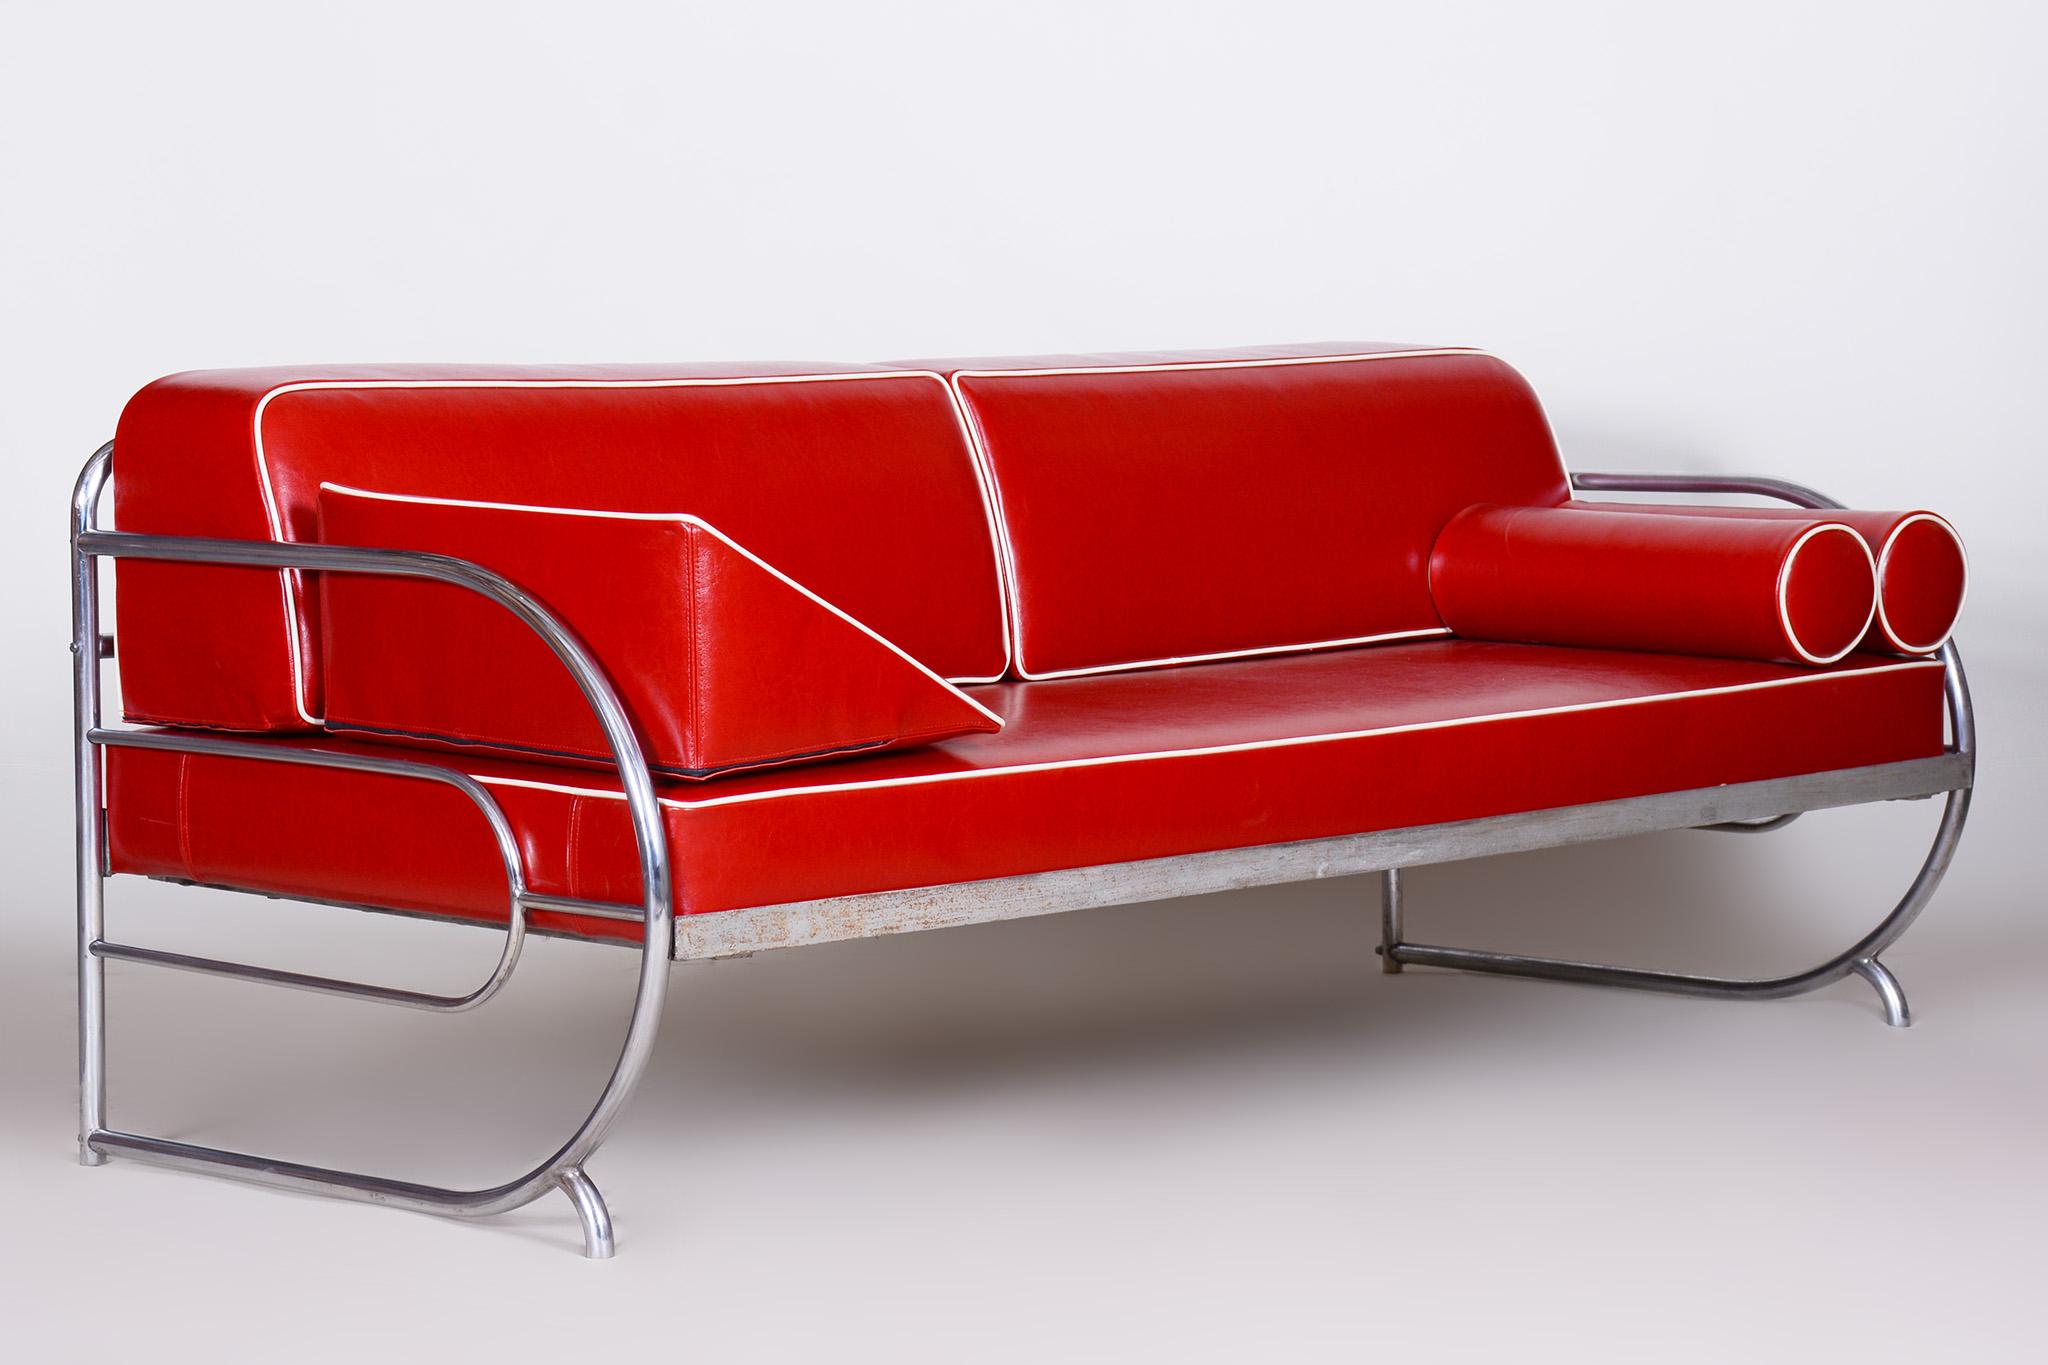 Restored Bauhaus Sofa by Robert Slezak, High-Quality Leather, Chrome, 1930s In Good Condition For Sale In Horomerice, CZ